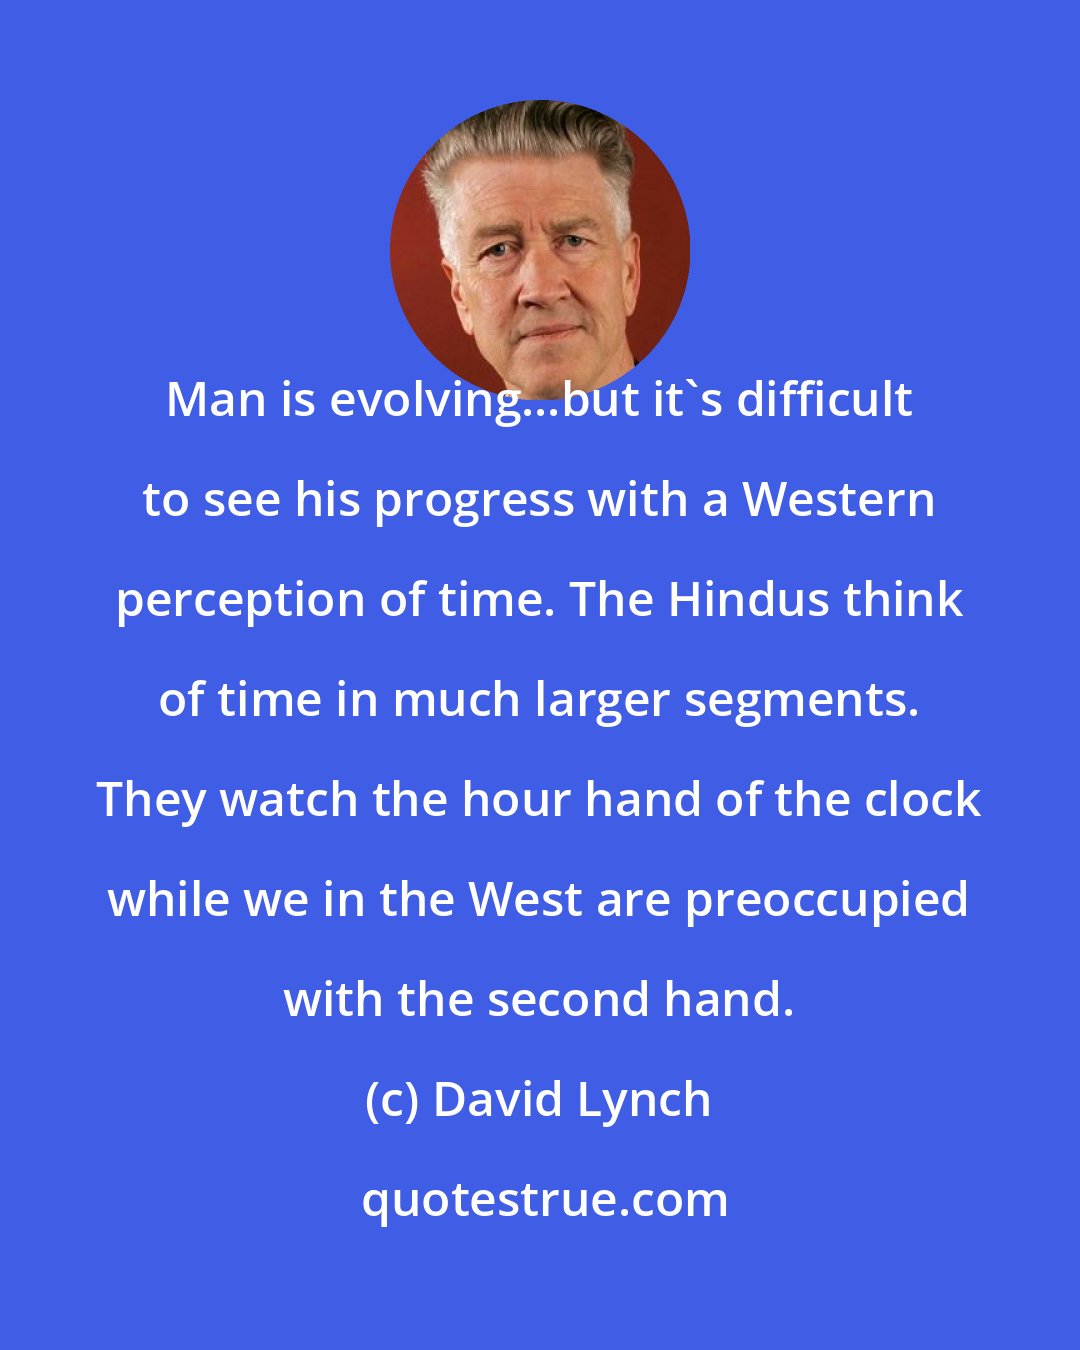 David Lynch: Man is evolving...but it's difficult to see his progress with a Western perception of time. The Hindus think of time in much larger segments. They watch the hour hand of the clock while we in the West are preoccupied with the second hand.